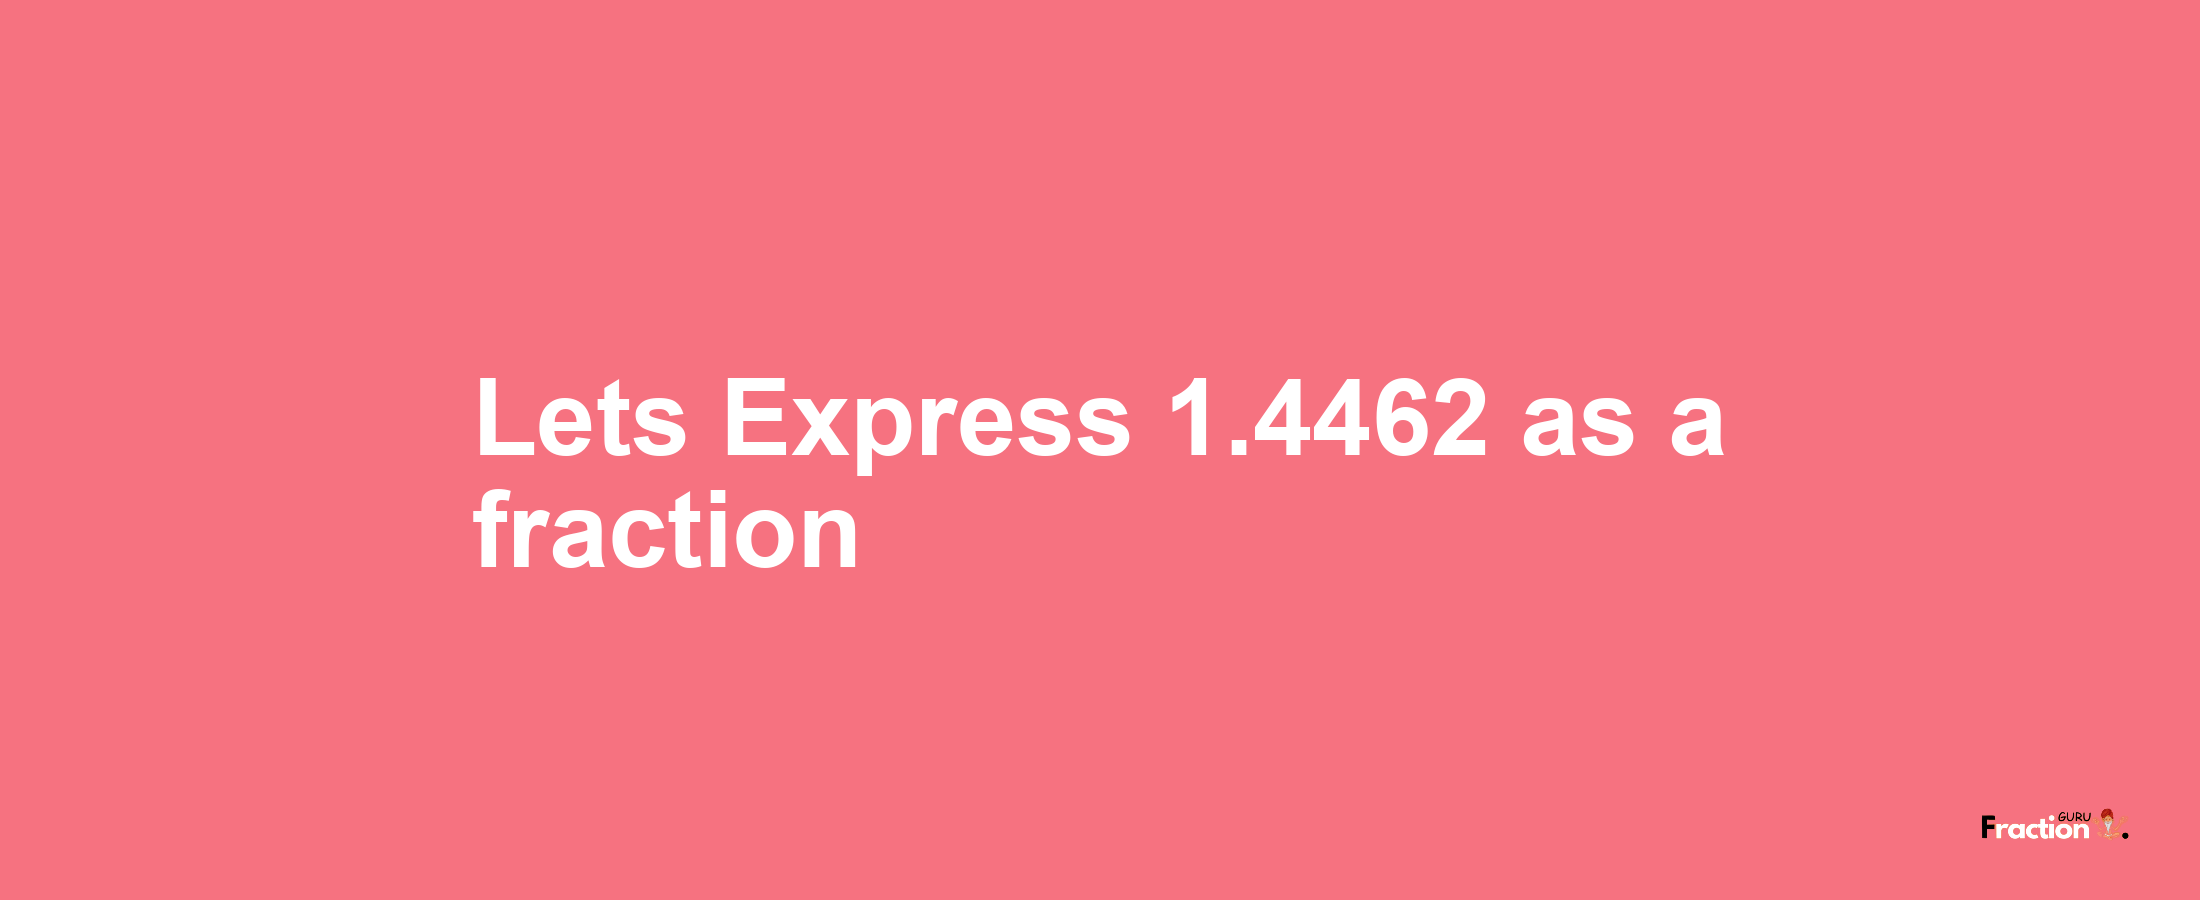 Lets Express 1.4462 as afraction